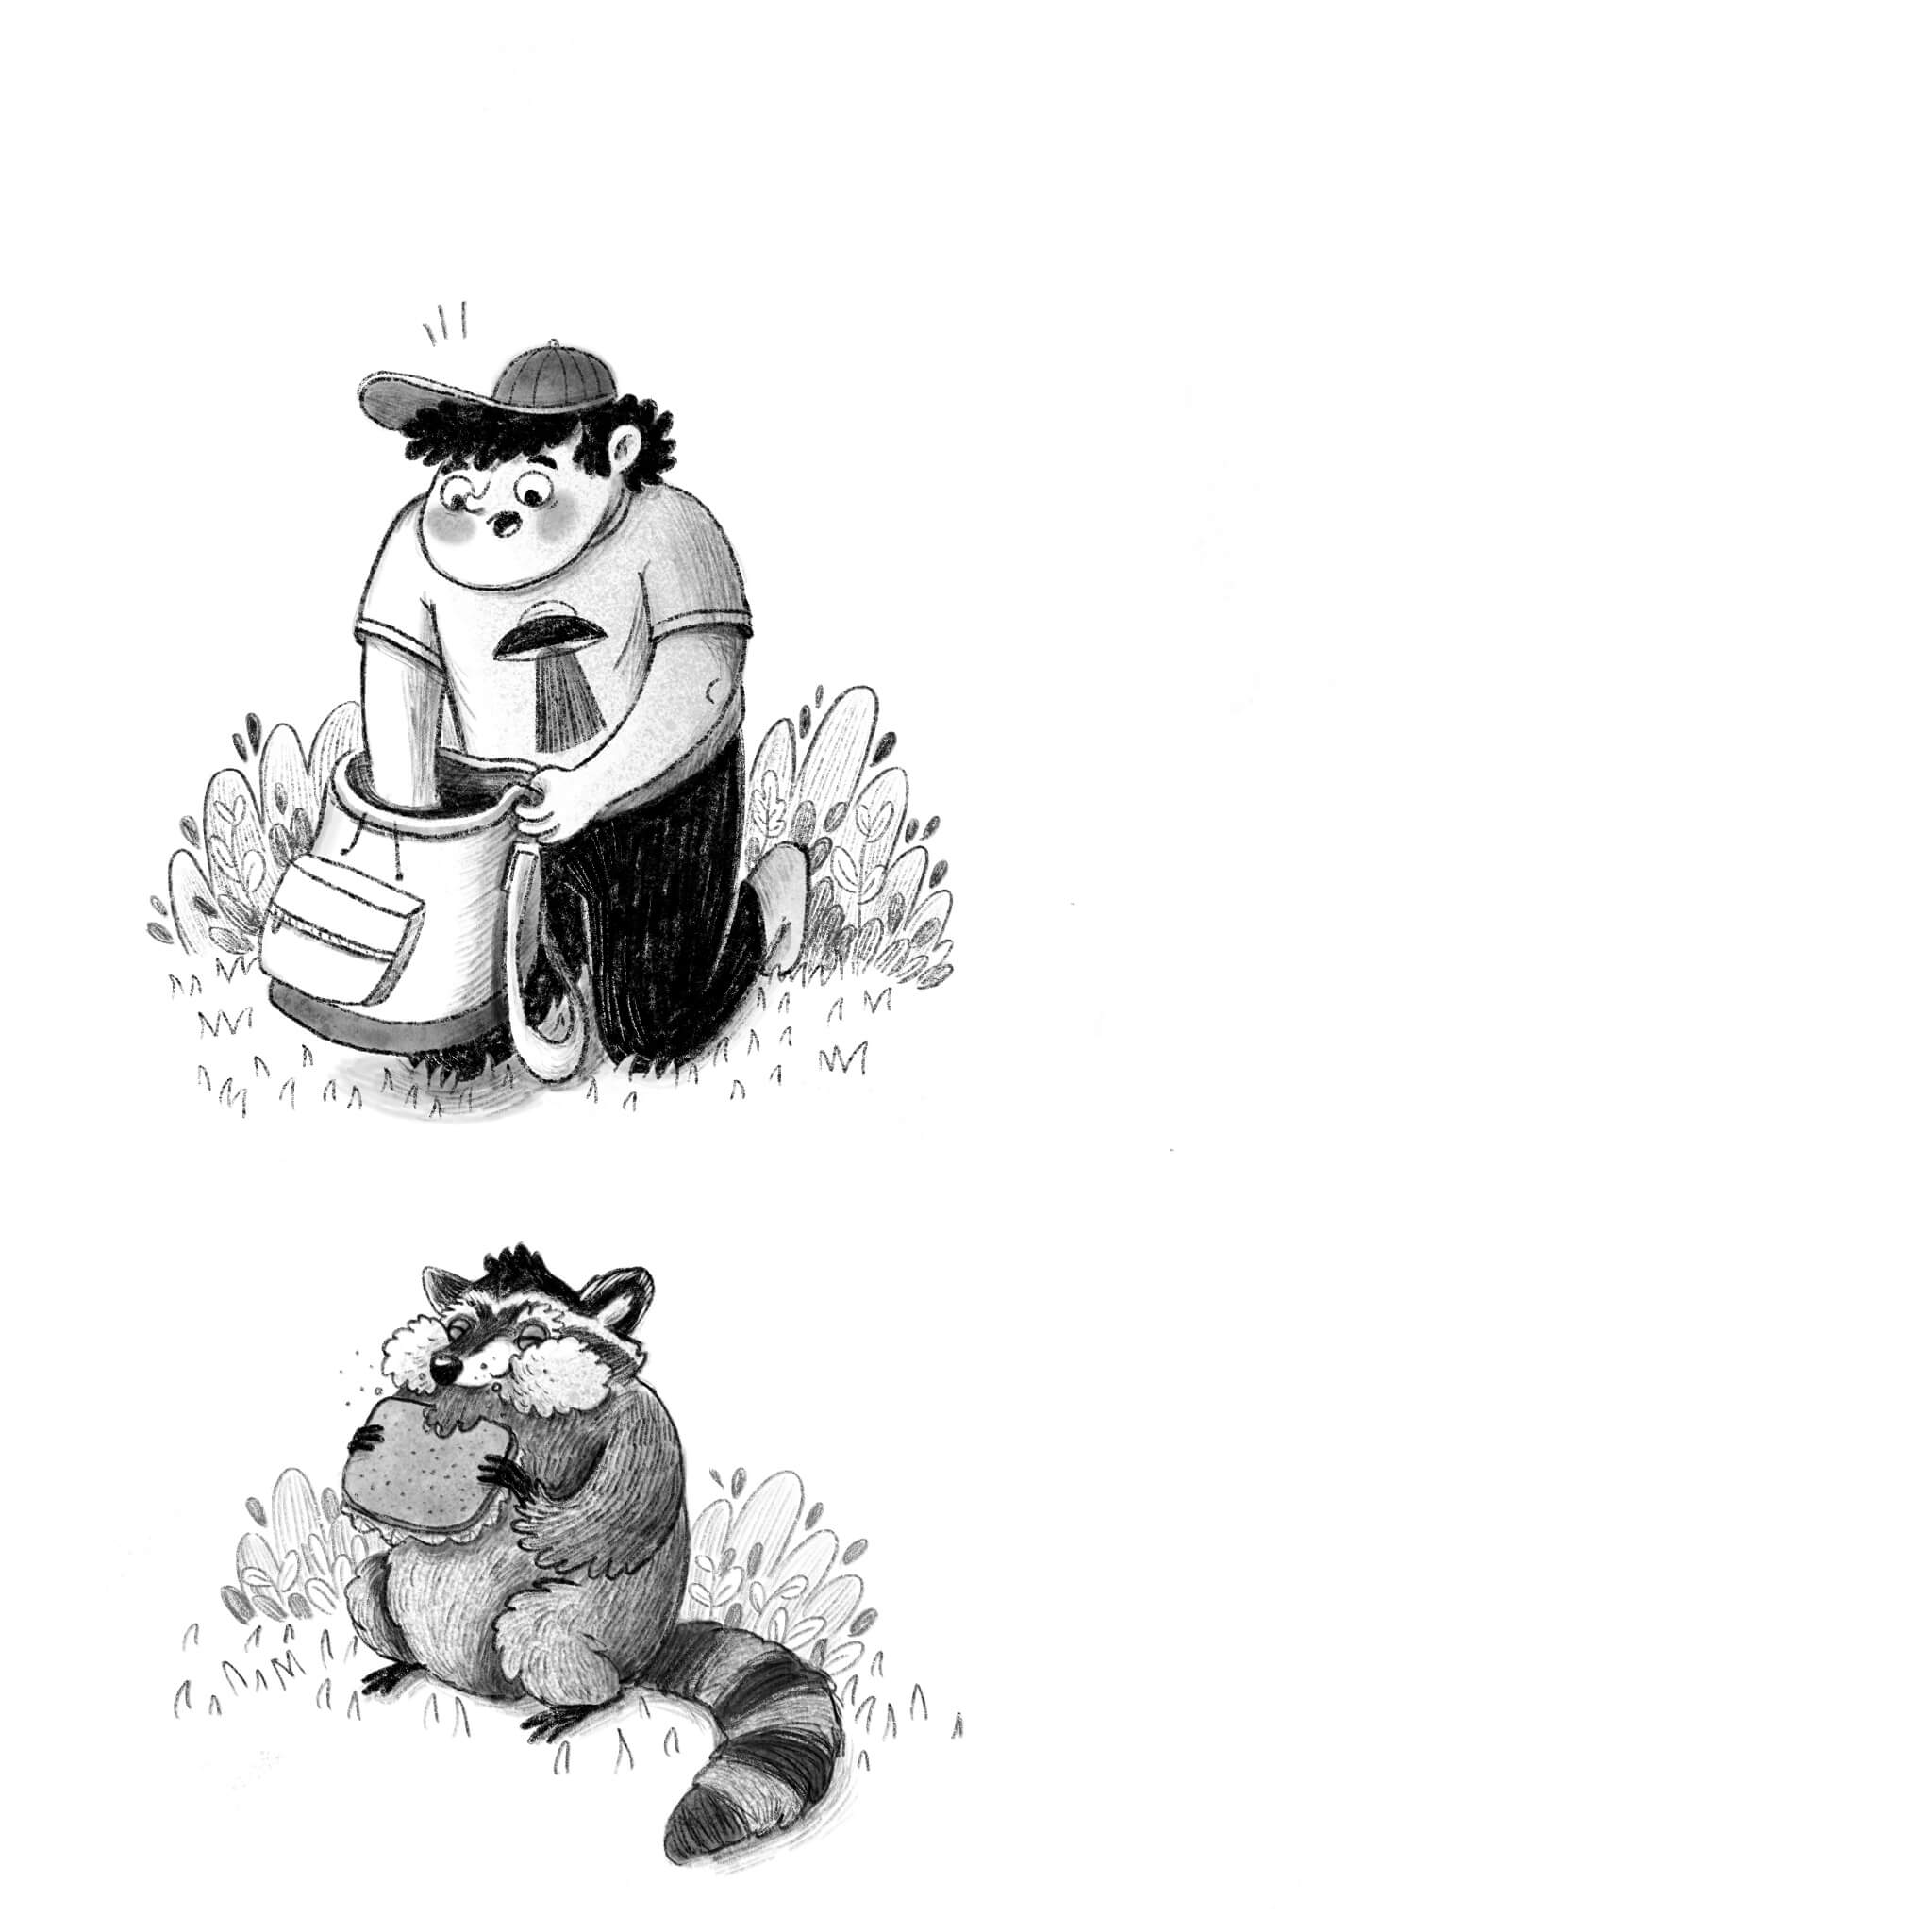 a boy and aracoon. The boy is searching for his sandwich in his backpack. the racoon is eating his sandwich.